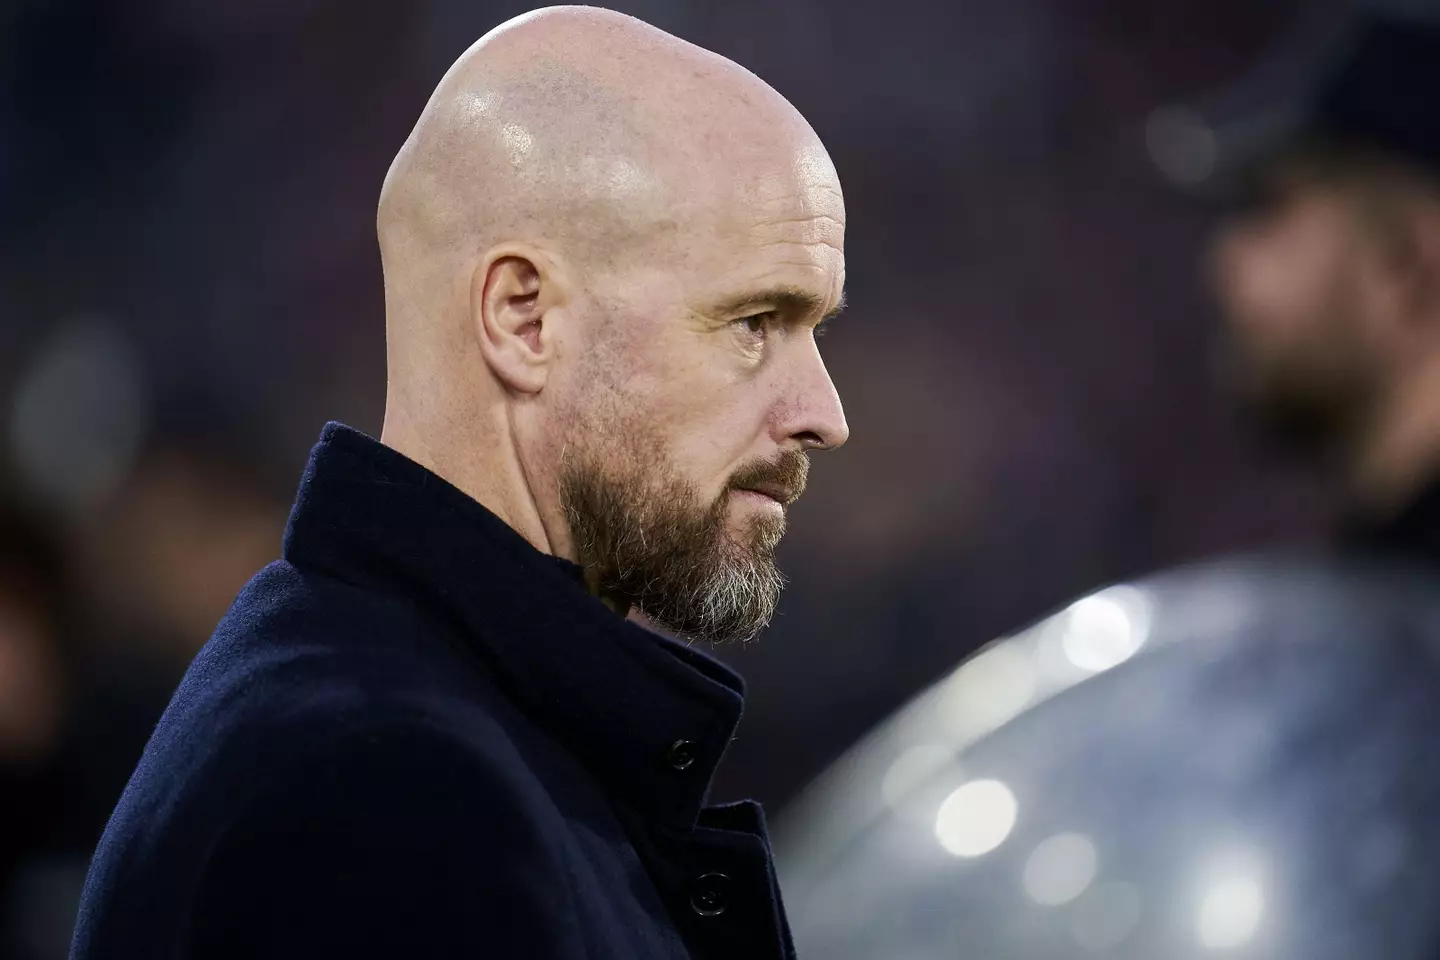 Ten Hag has been confirmed as the next permanent manager of Manchester United (Image: PA)